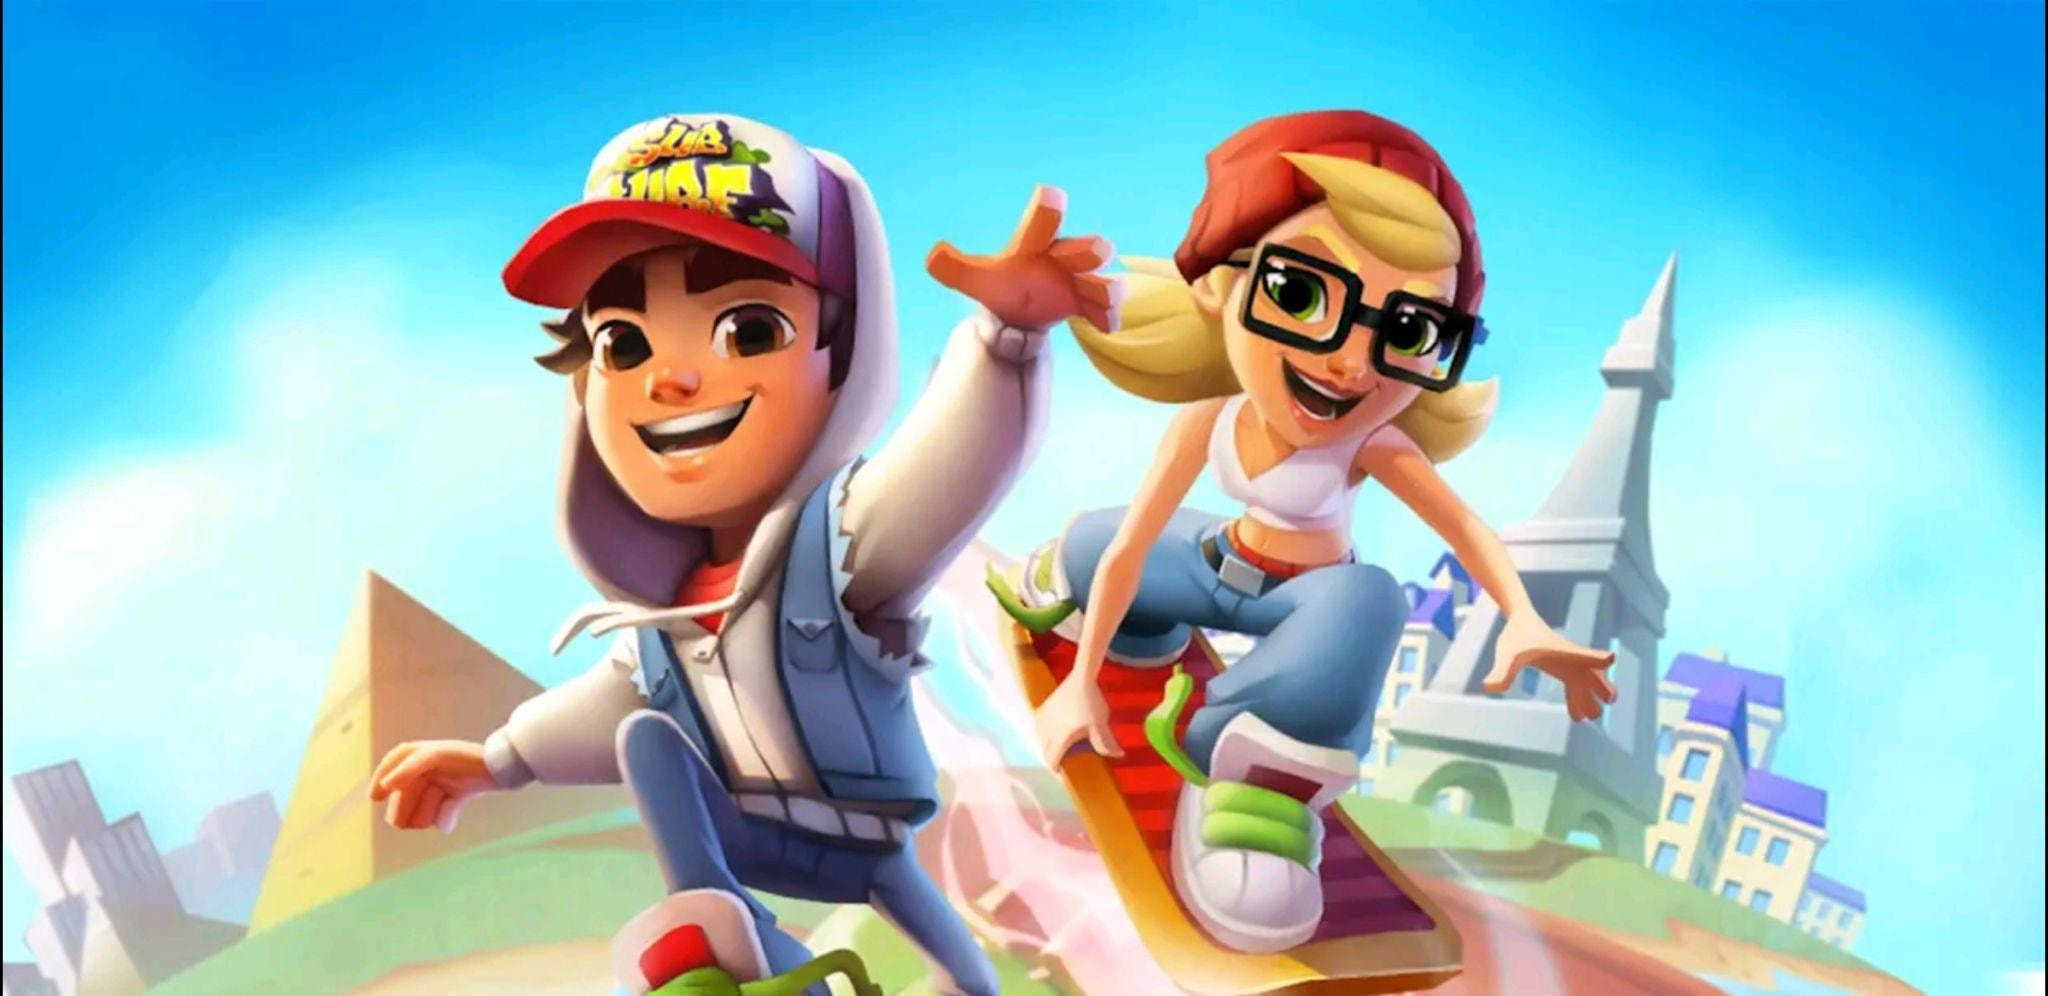 How to PLAY [ Subway Surfers ] on PC DOWNLOAD and INSTALL